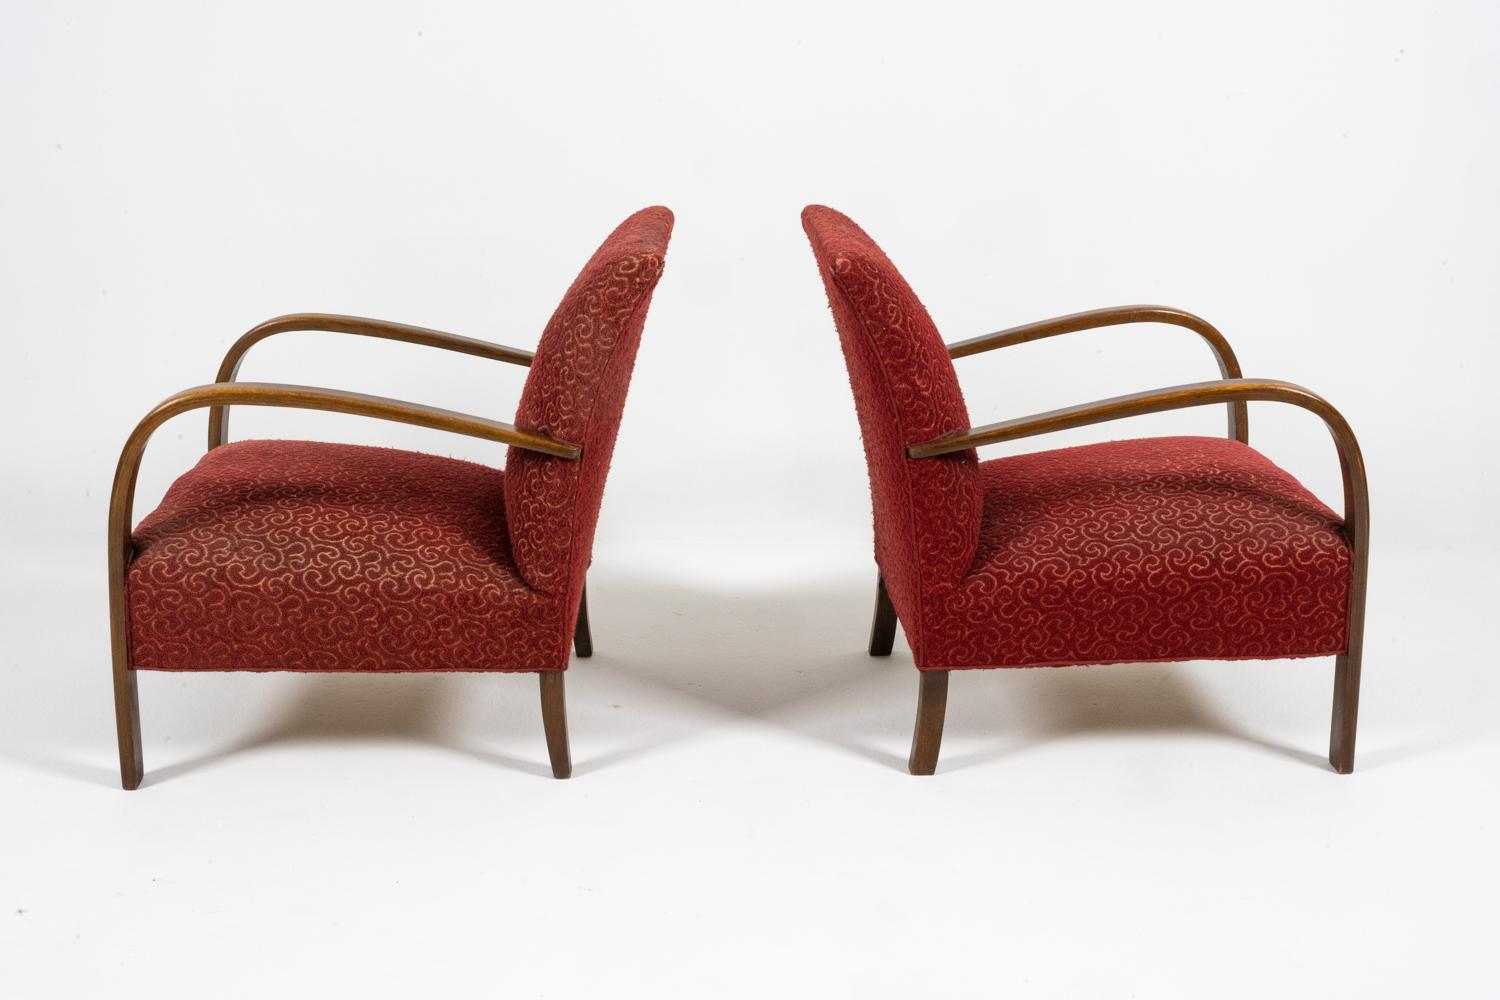 Pair of Danish Modern Lounge Chairs by Fritz Hansen, c. 1950s For Sale 5